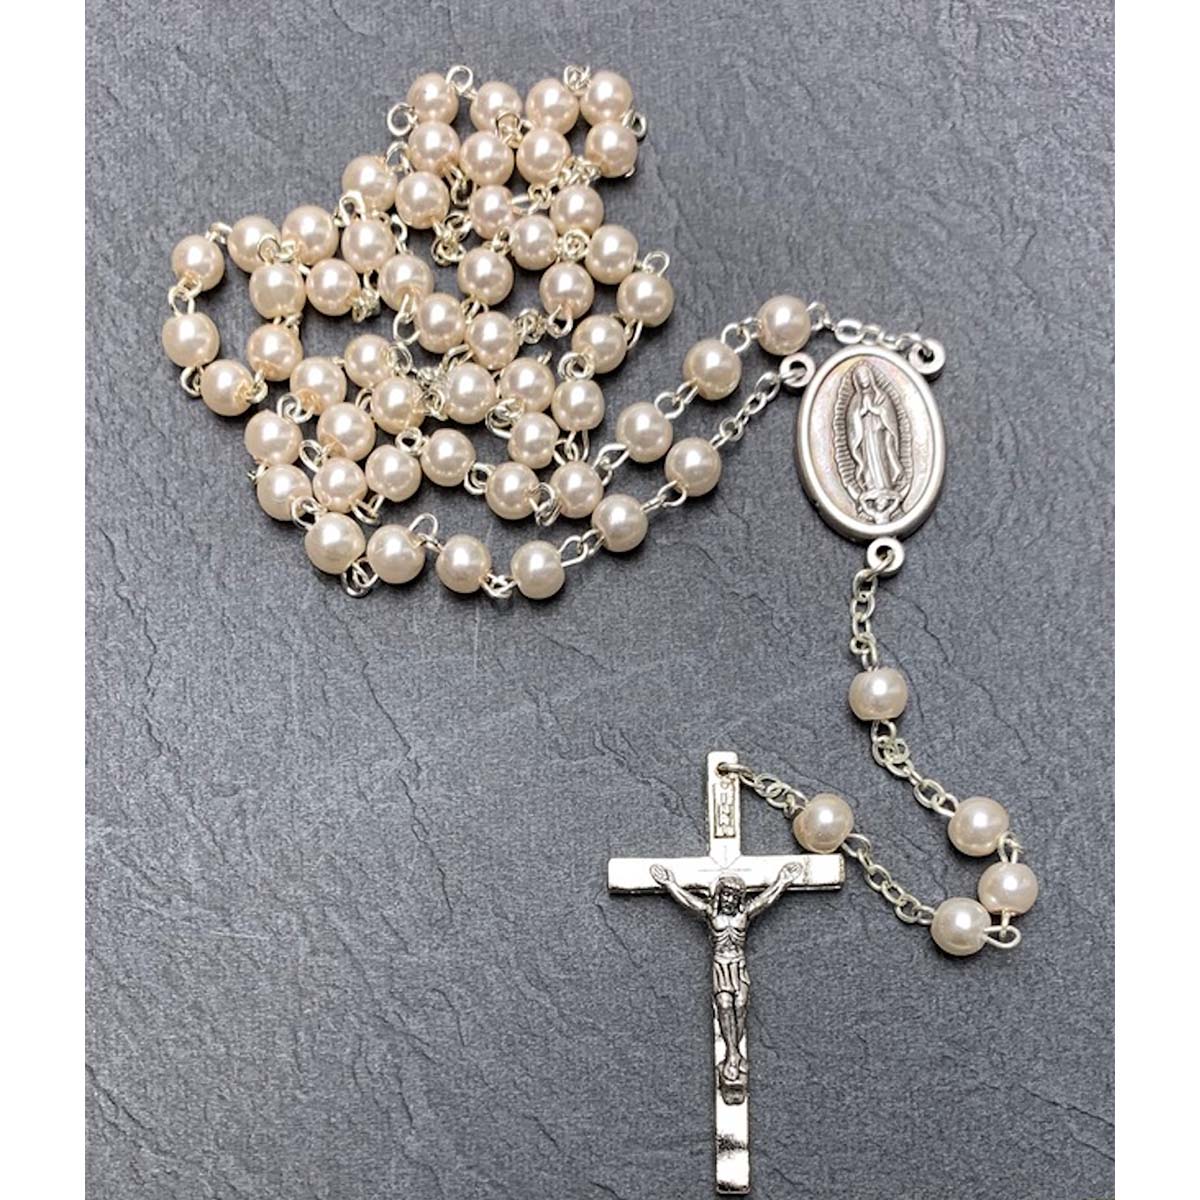 5mm Pearl Rosary - pack of 10